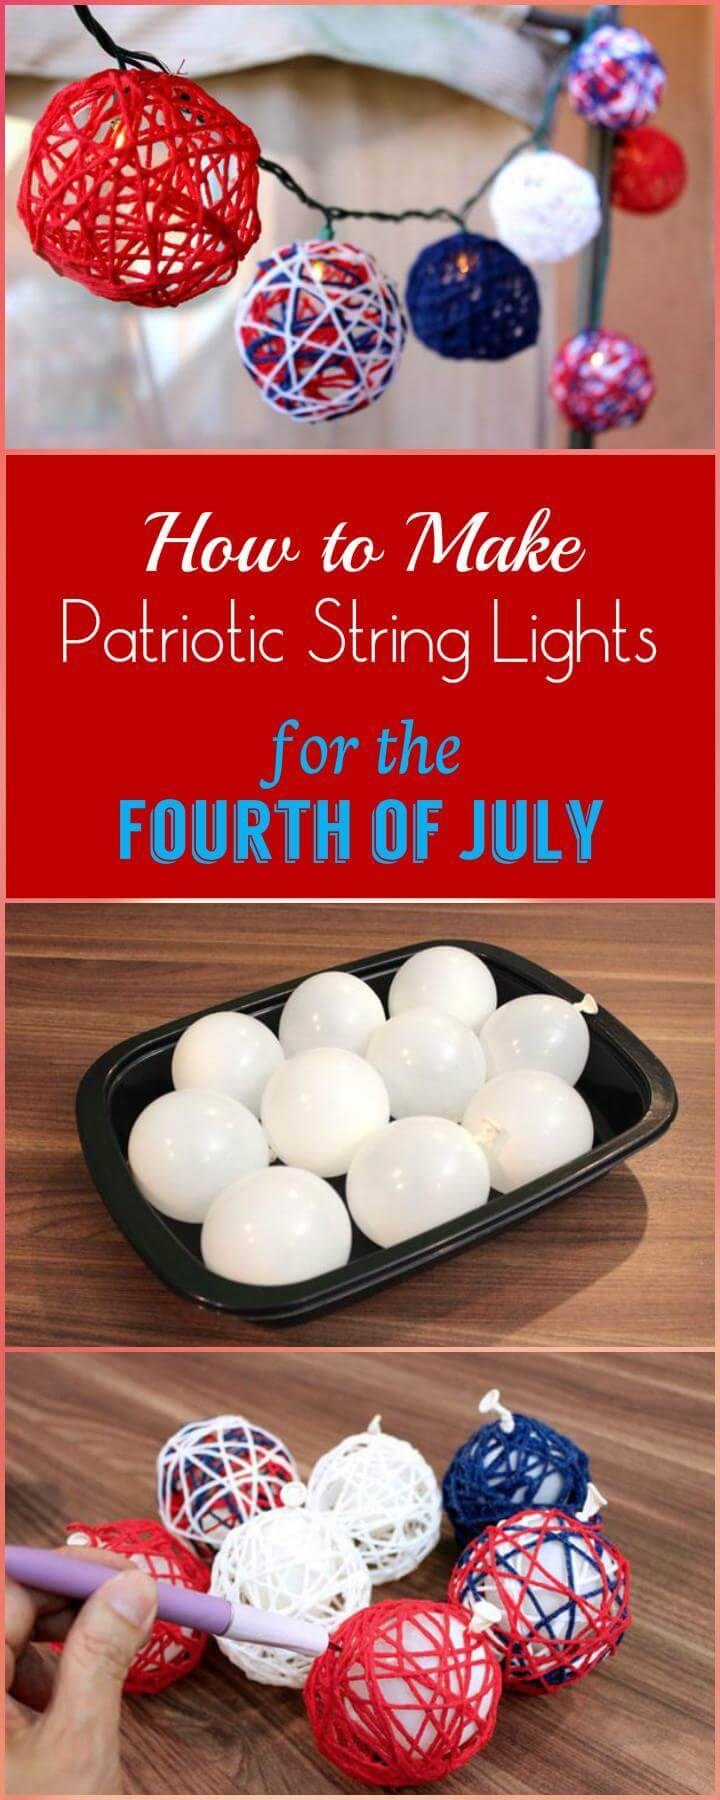 How to Make Patriotic String Lights for the Fourth of July